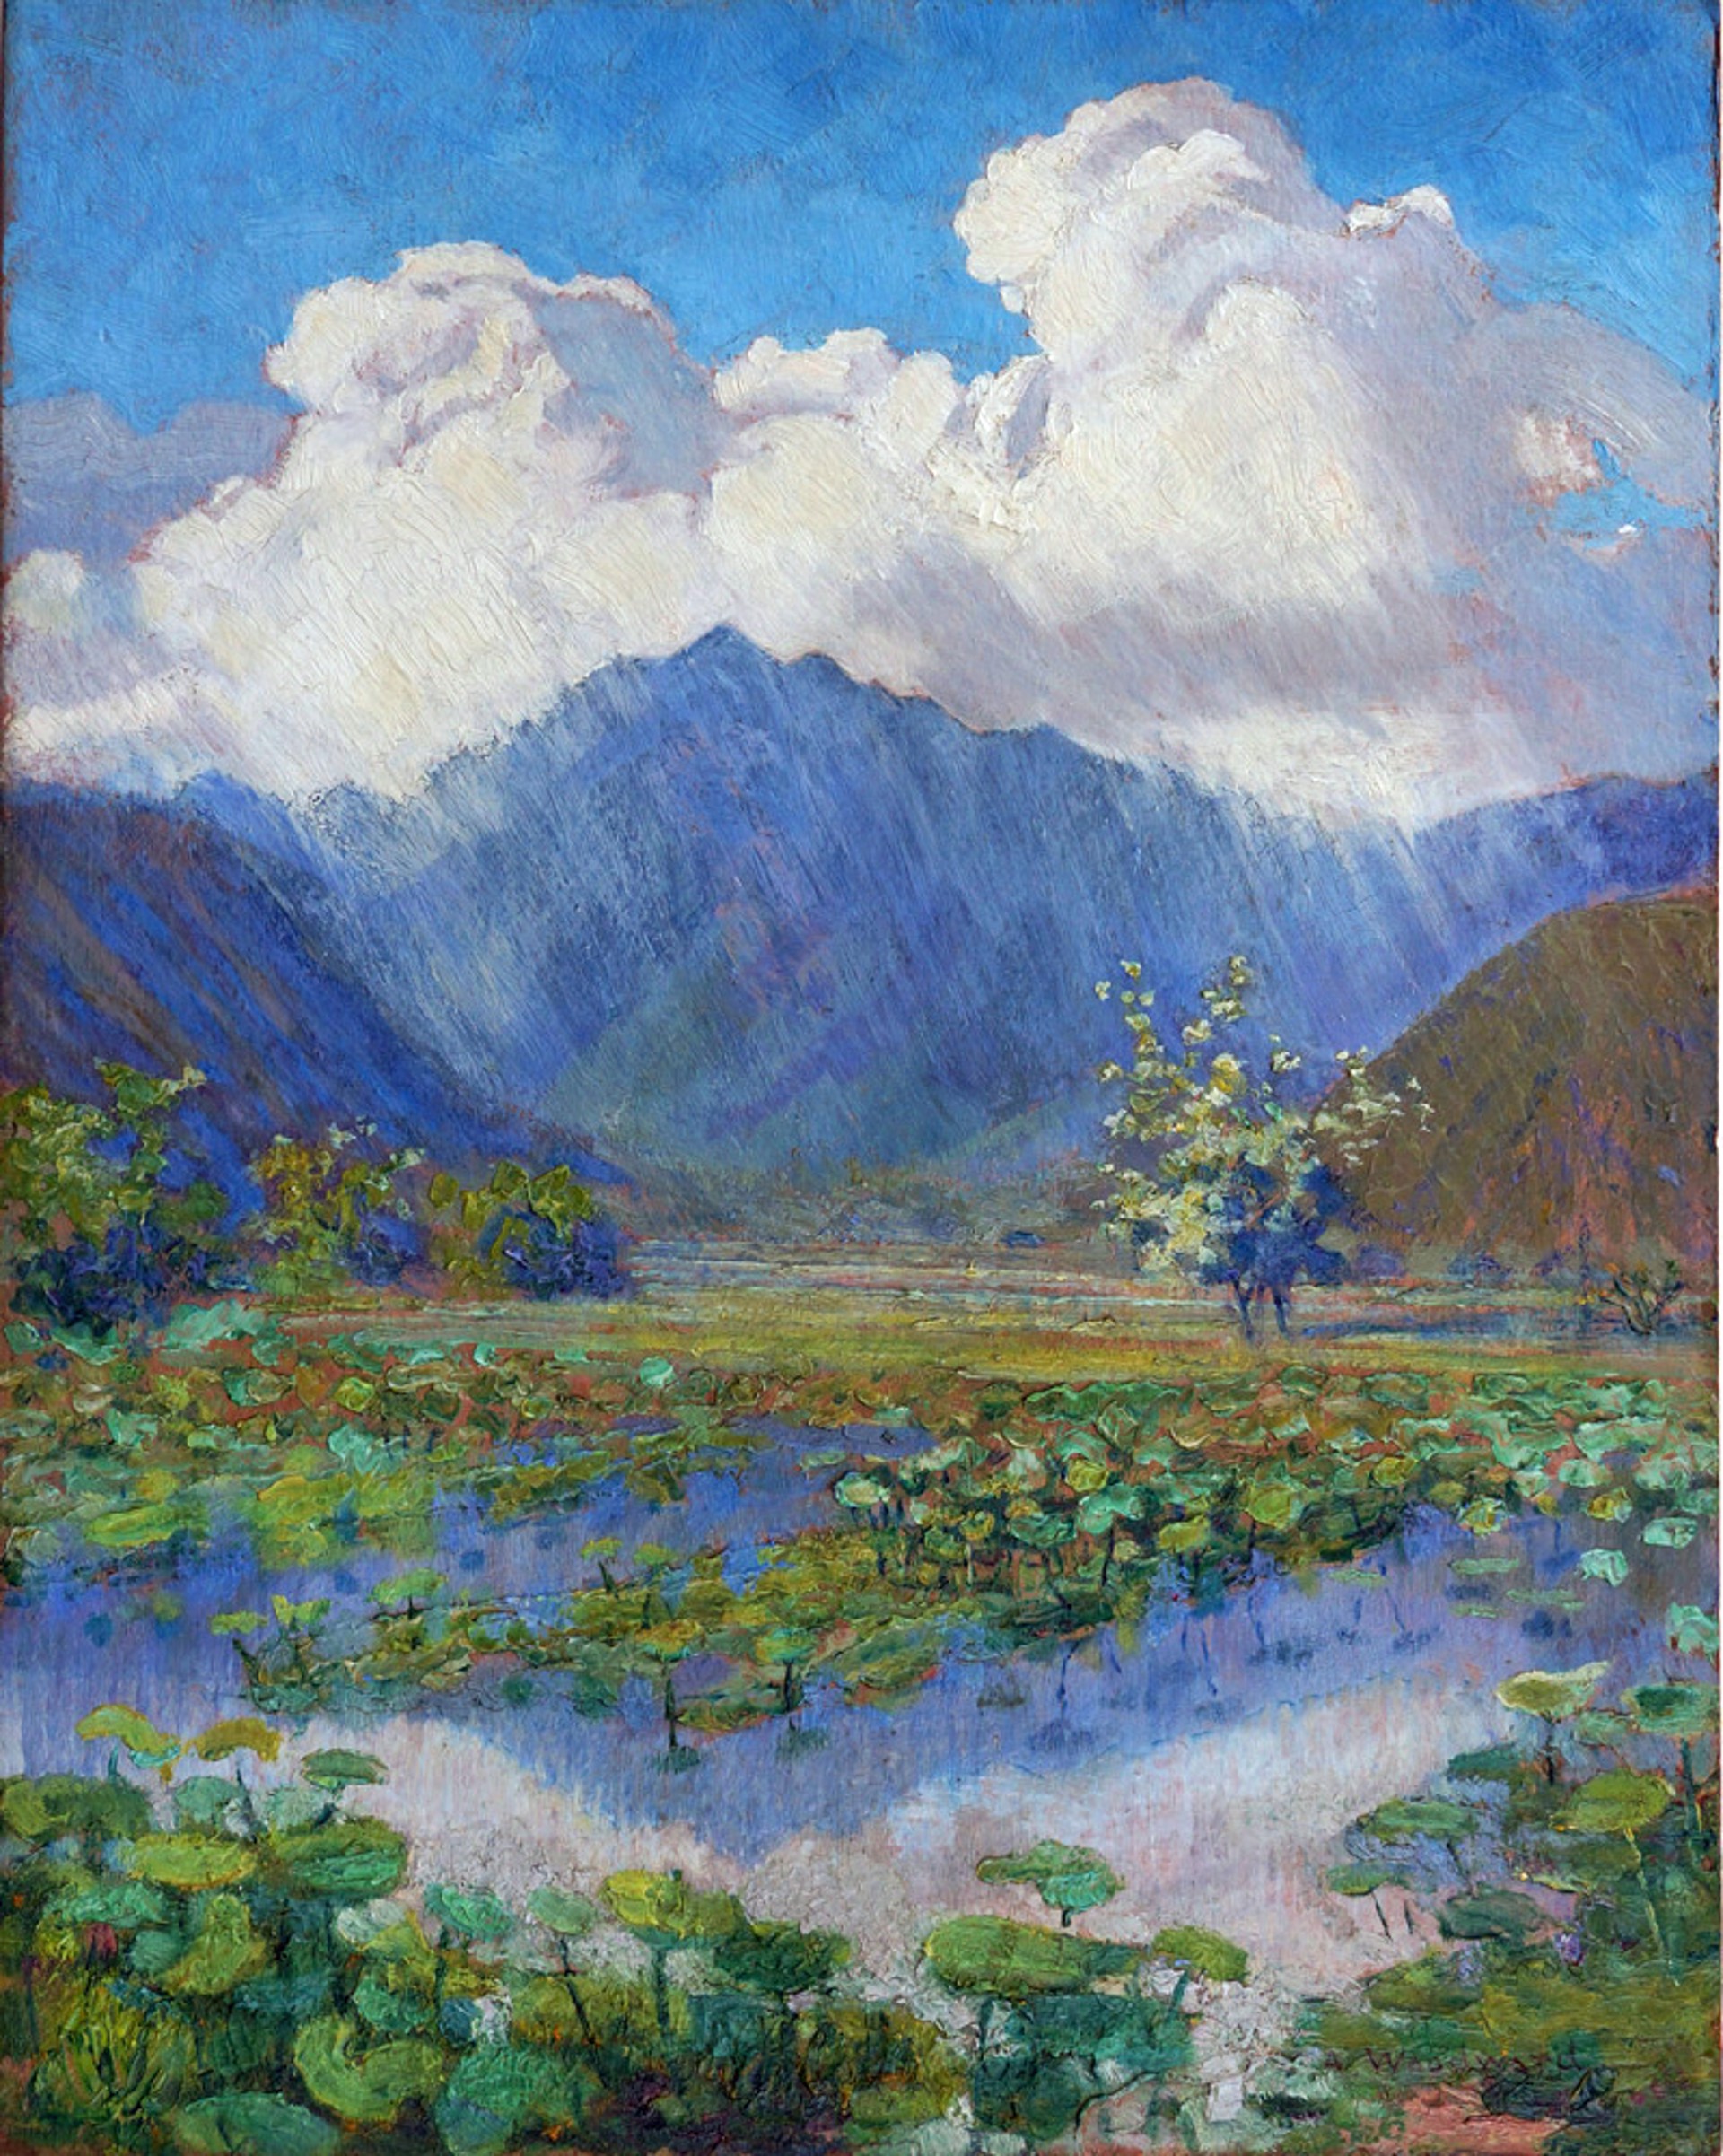 A Shower in the Mountains, Manoa Valley by Anna Woodward